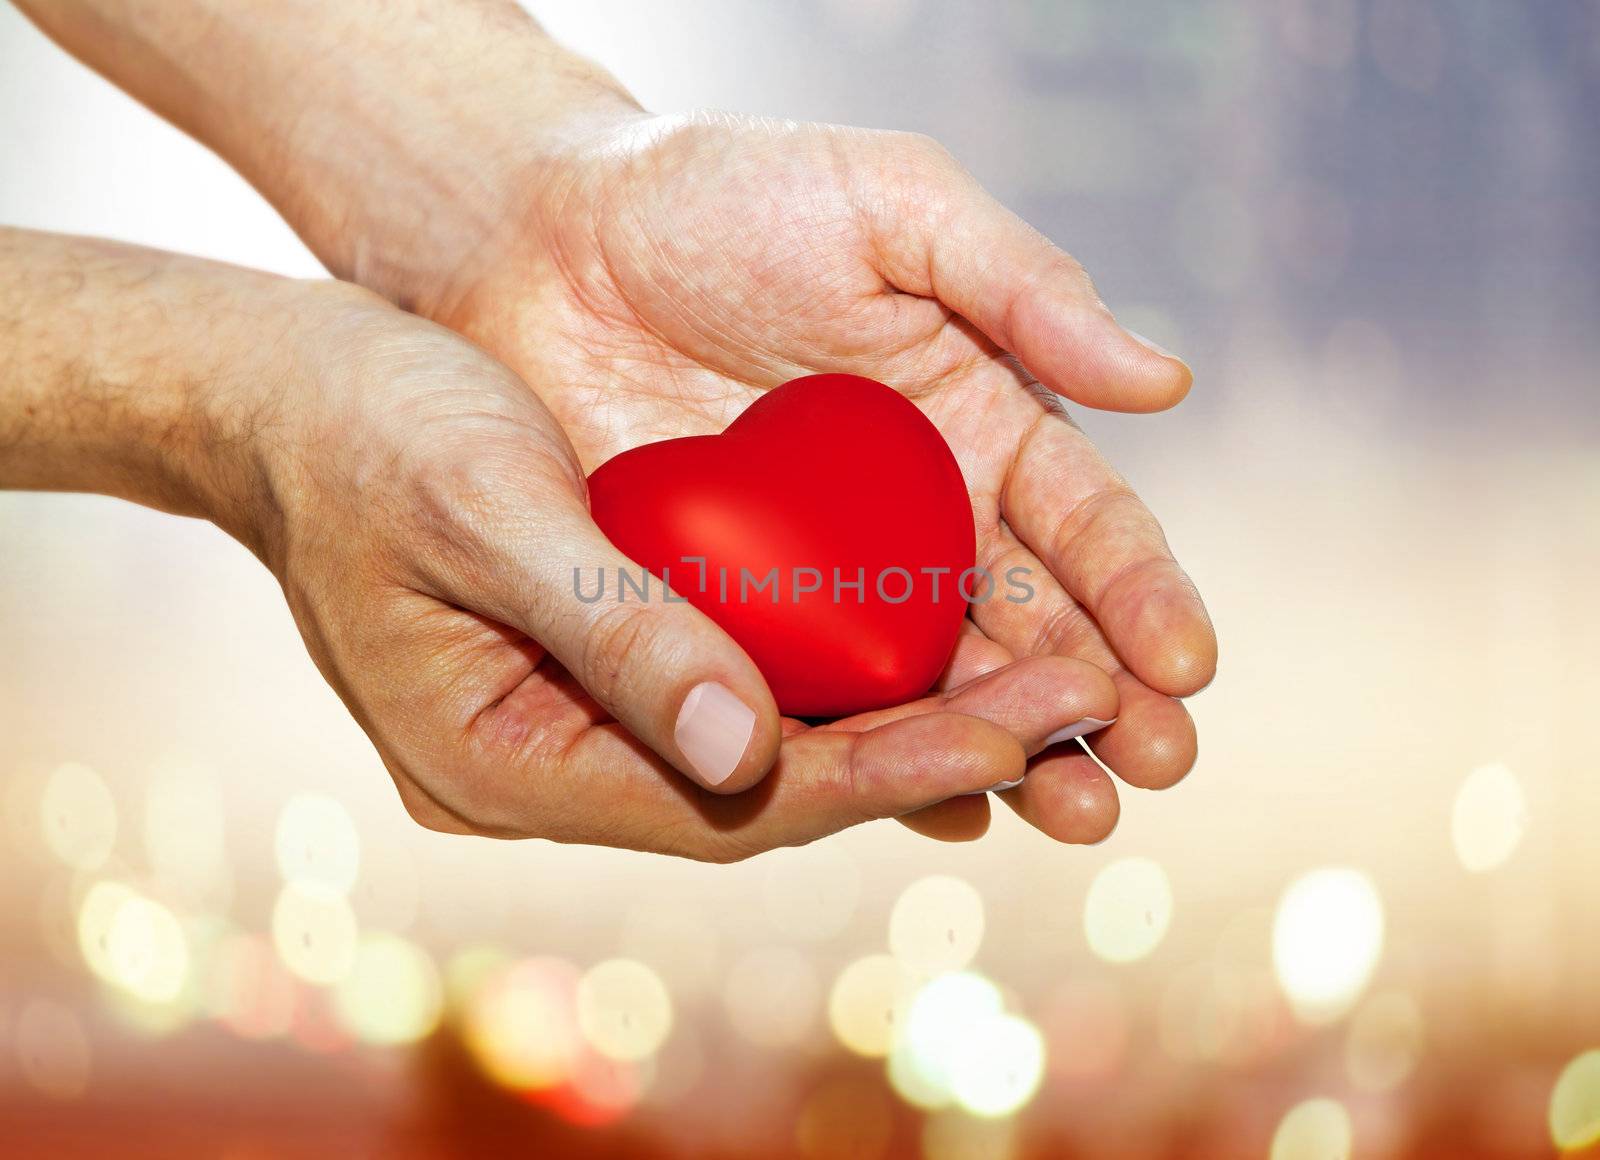 artificial red heart on hands by ssuaphoto